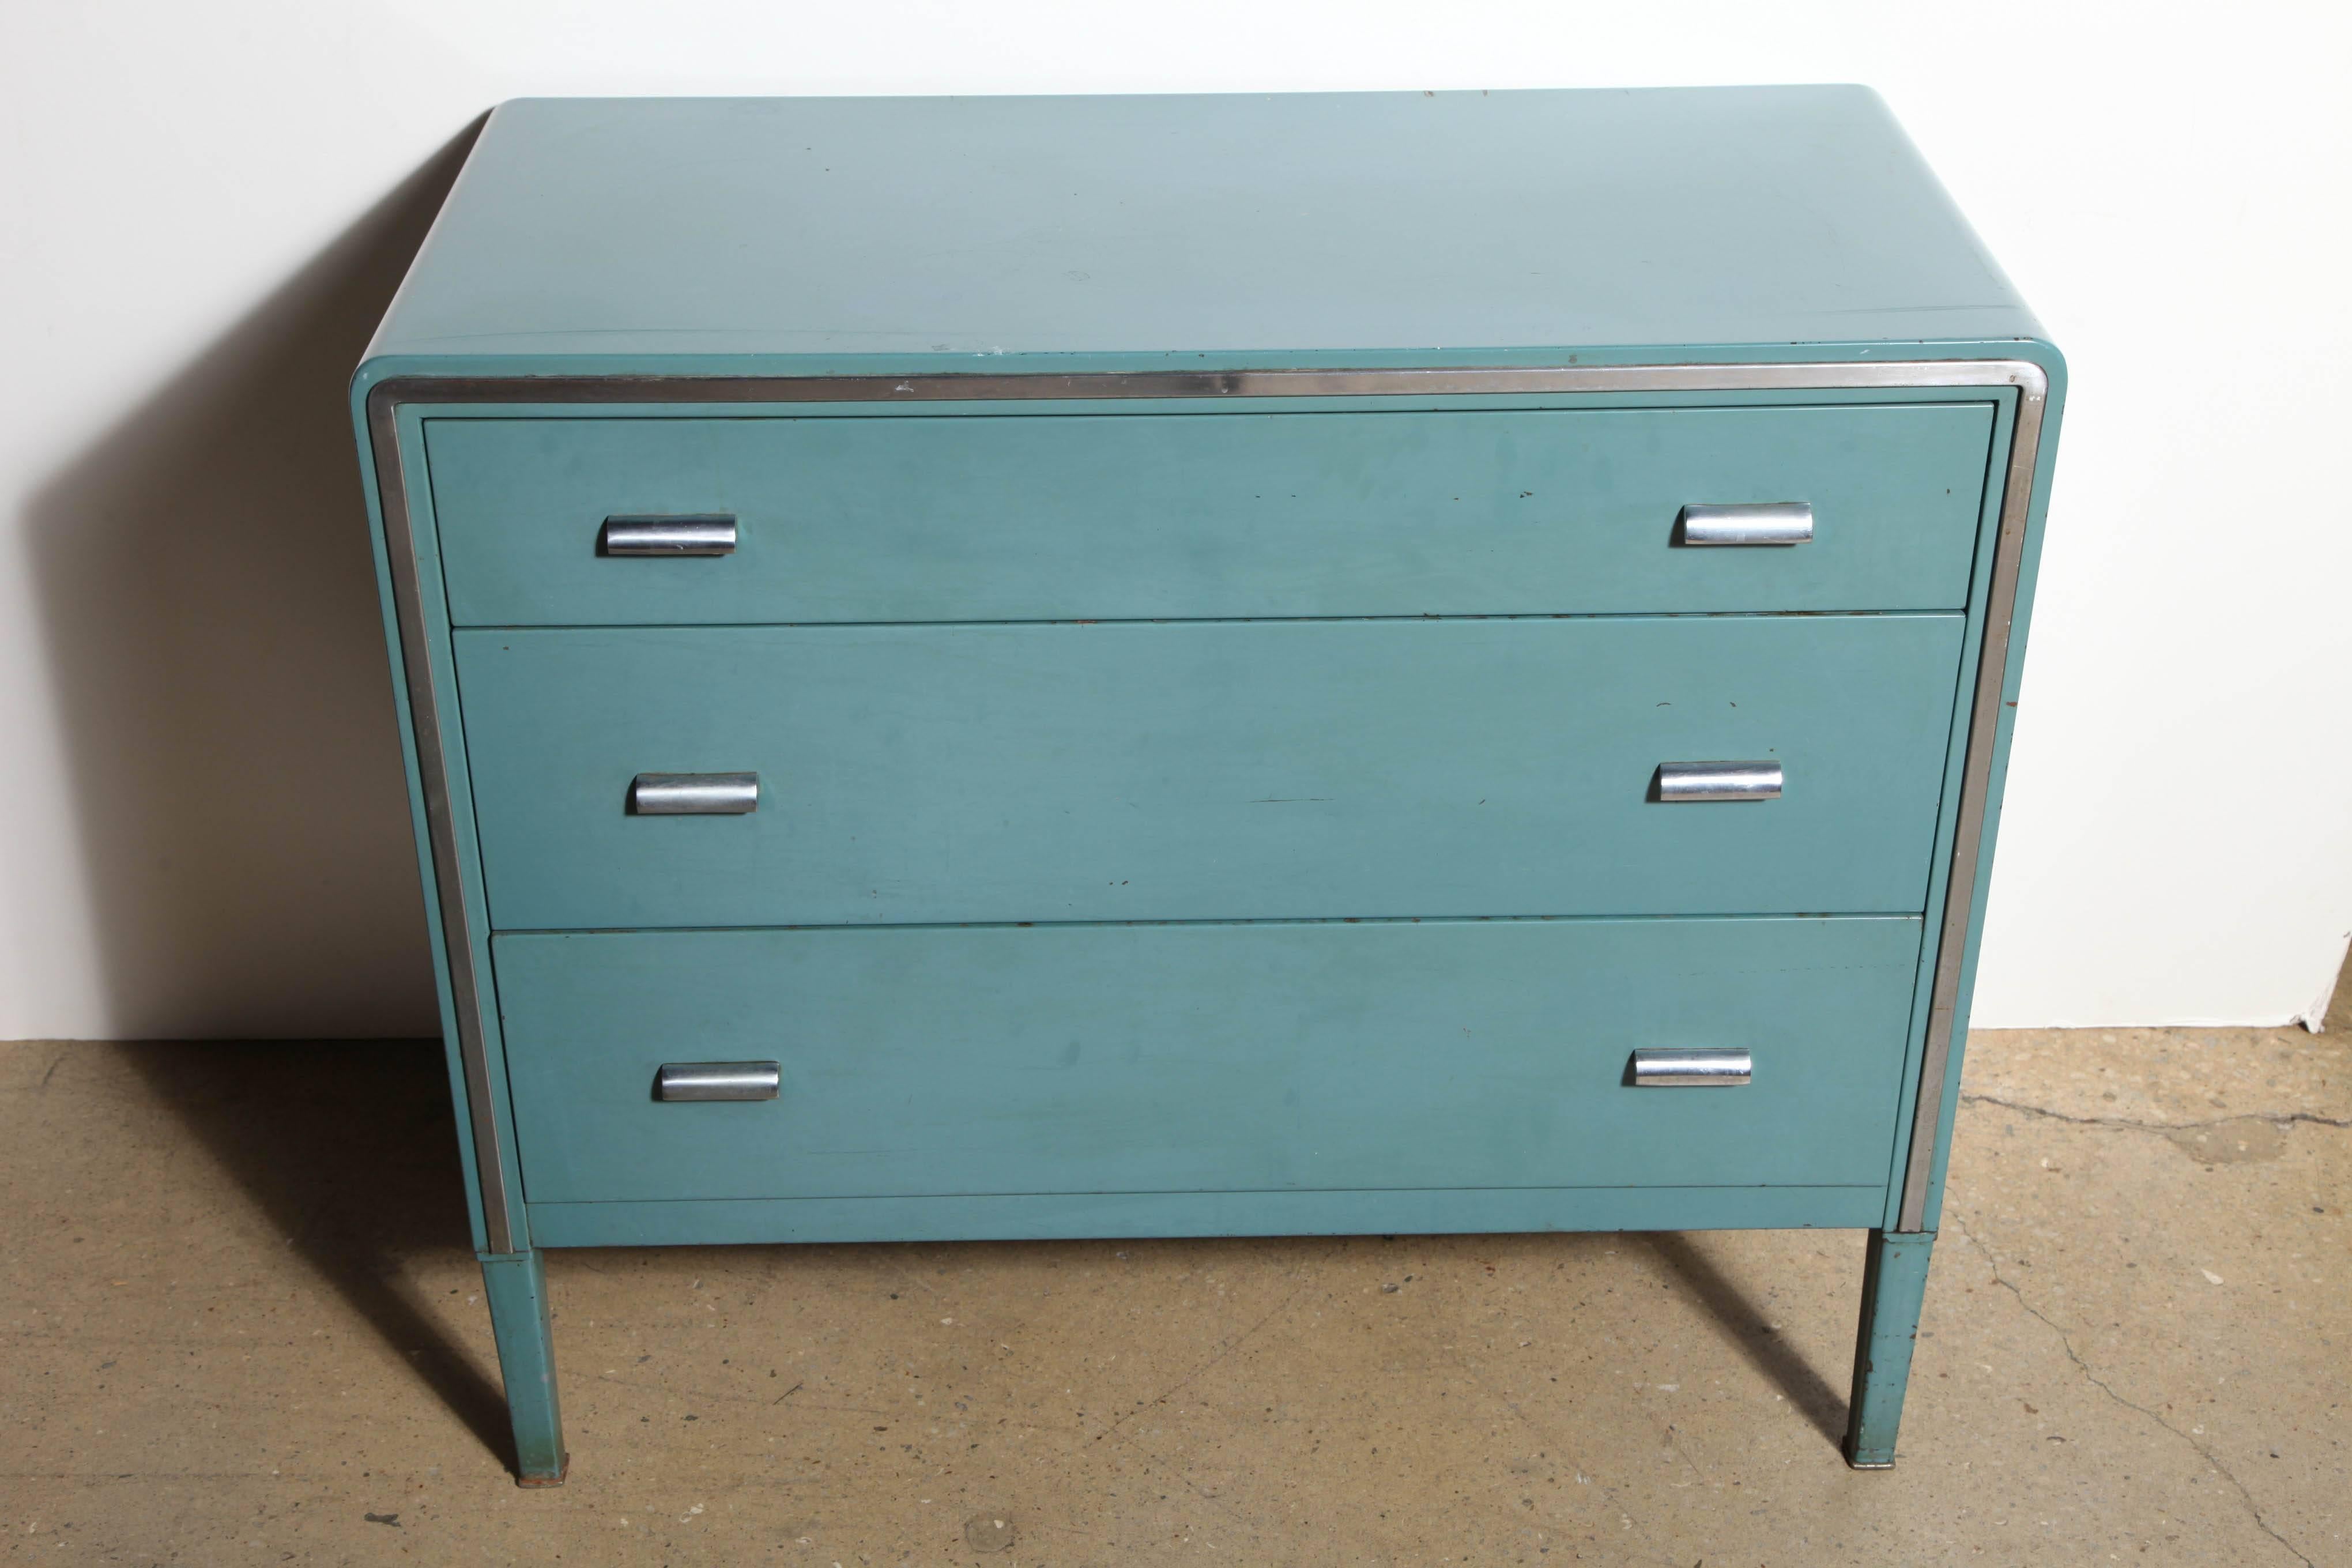 Art Deco Norman Bel Geddes for Simmons rare colored Teal, Aqua enameled Metal Dresser with 3 drawers, Chrome piping detail.  Polished Steel pulls.  Original condition